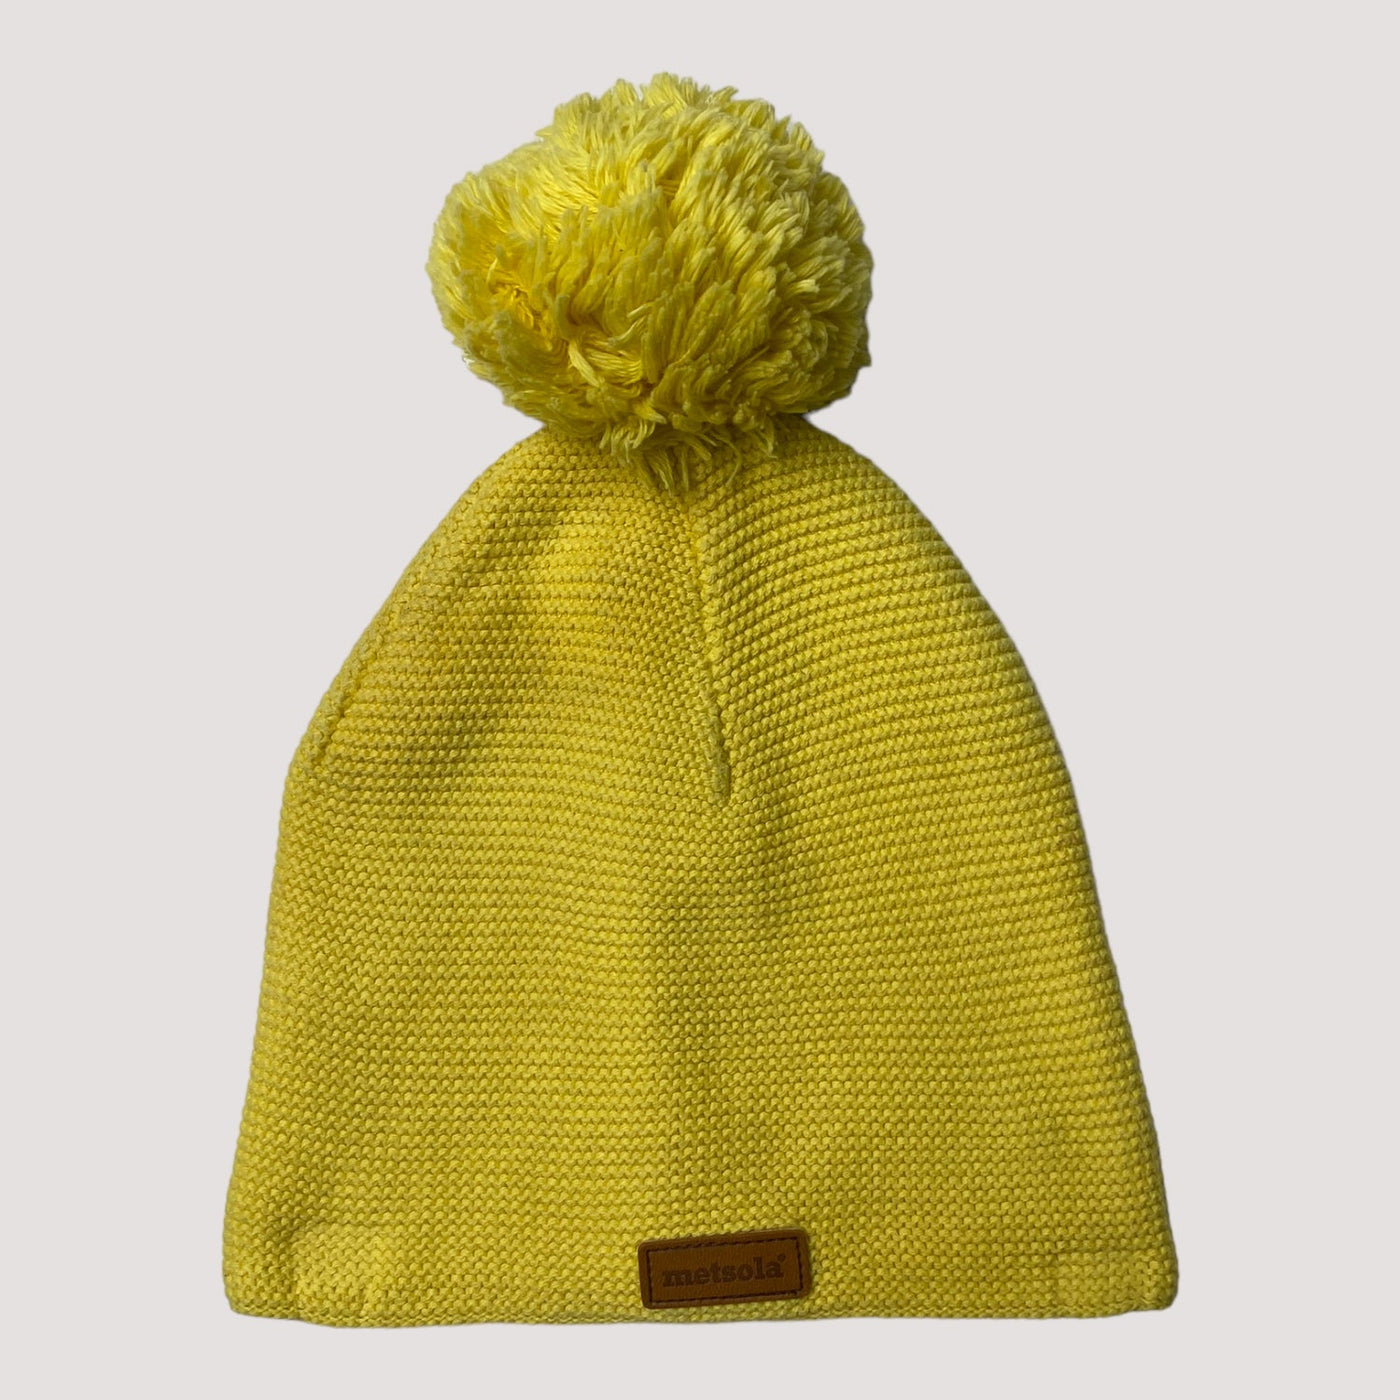 Metsola knitted cotton beanie, yellow | 3-5y